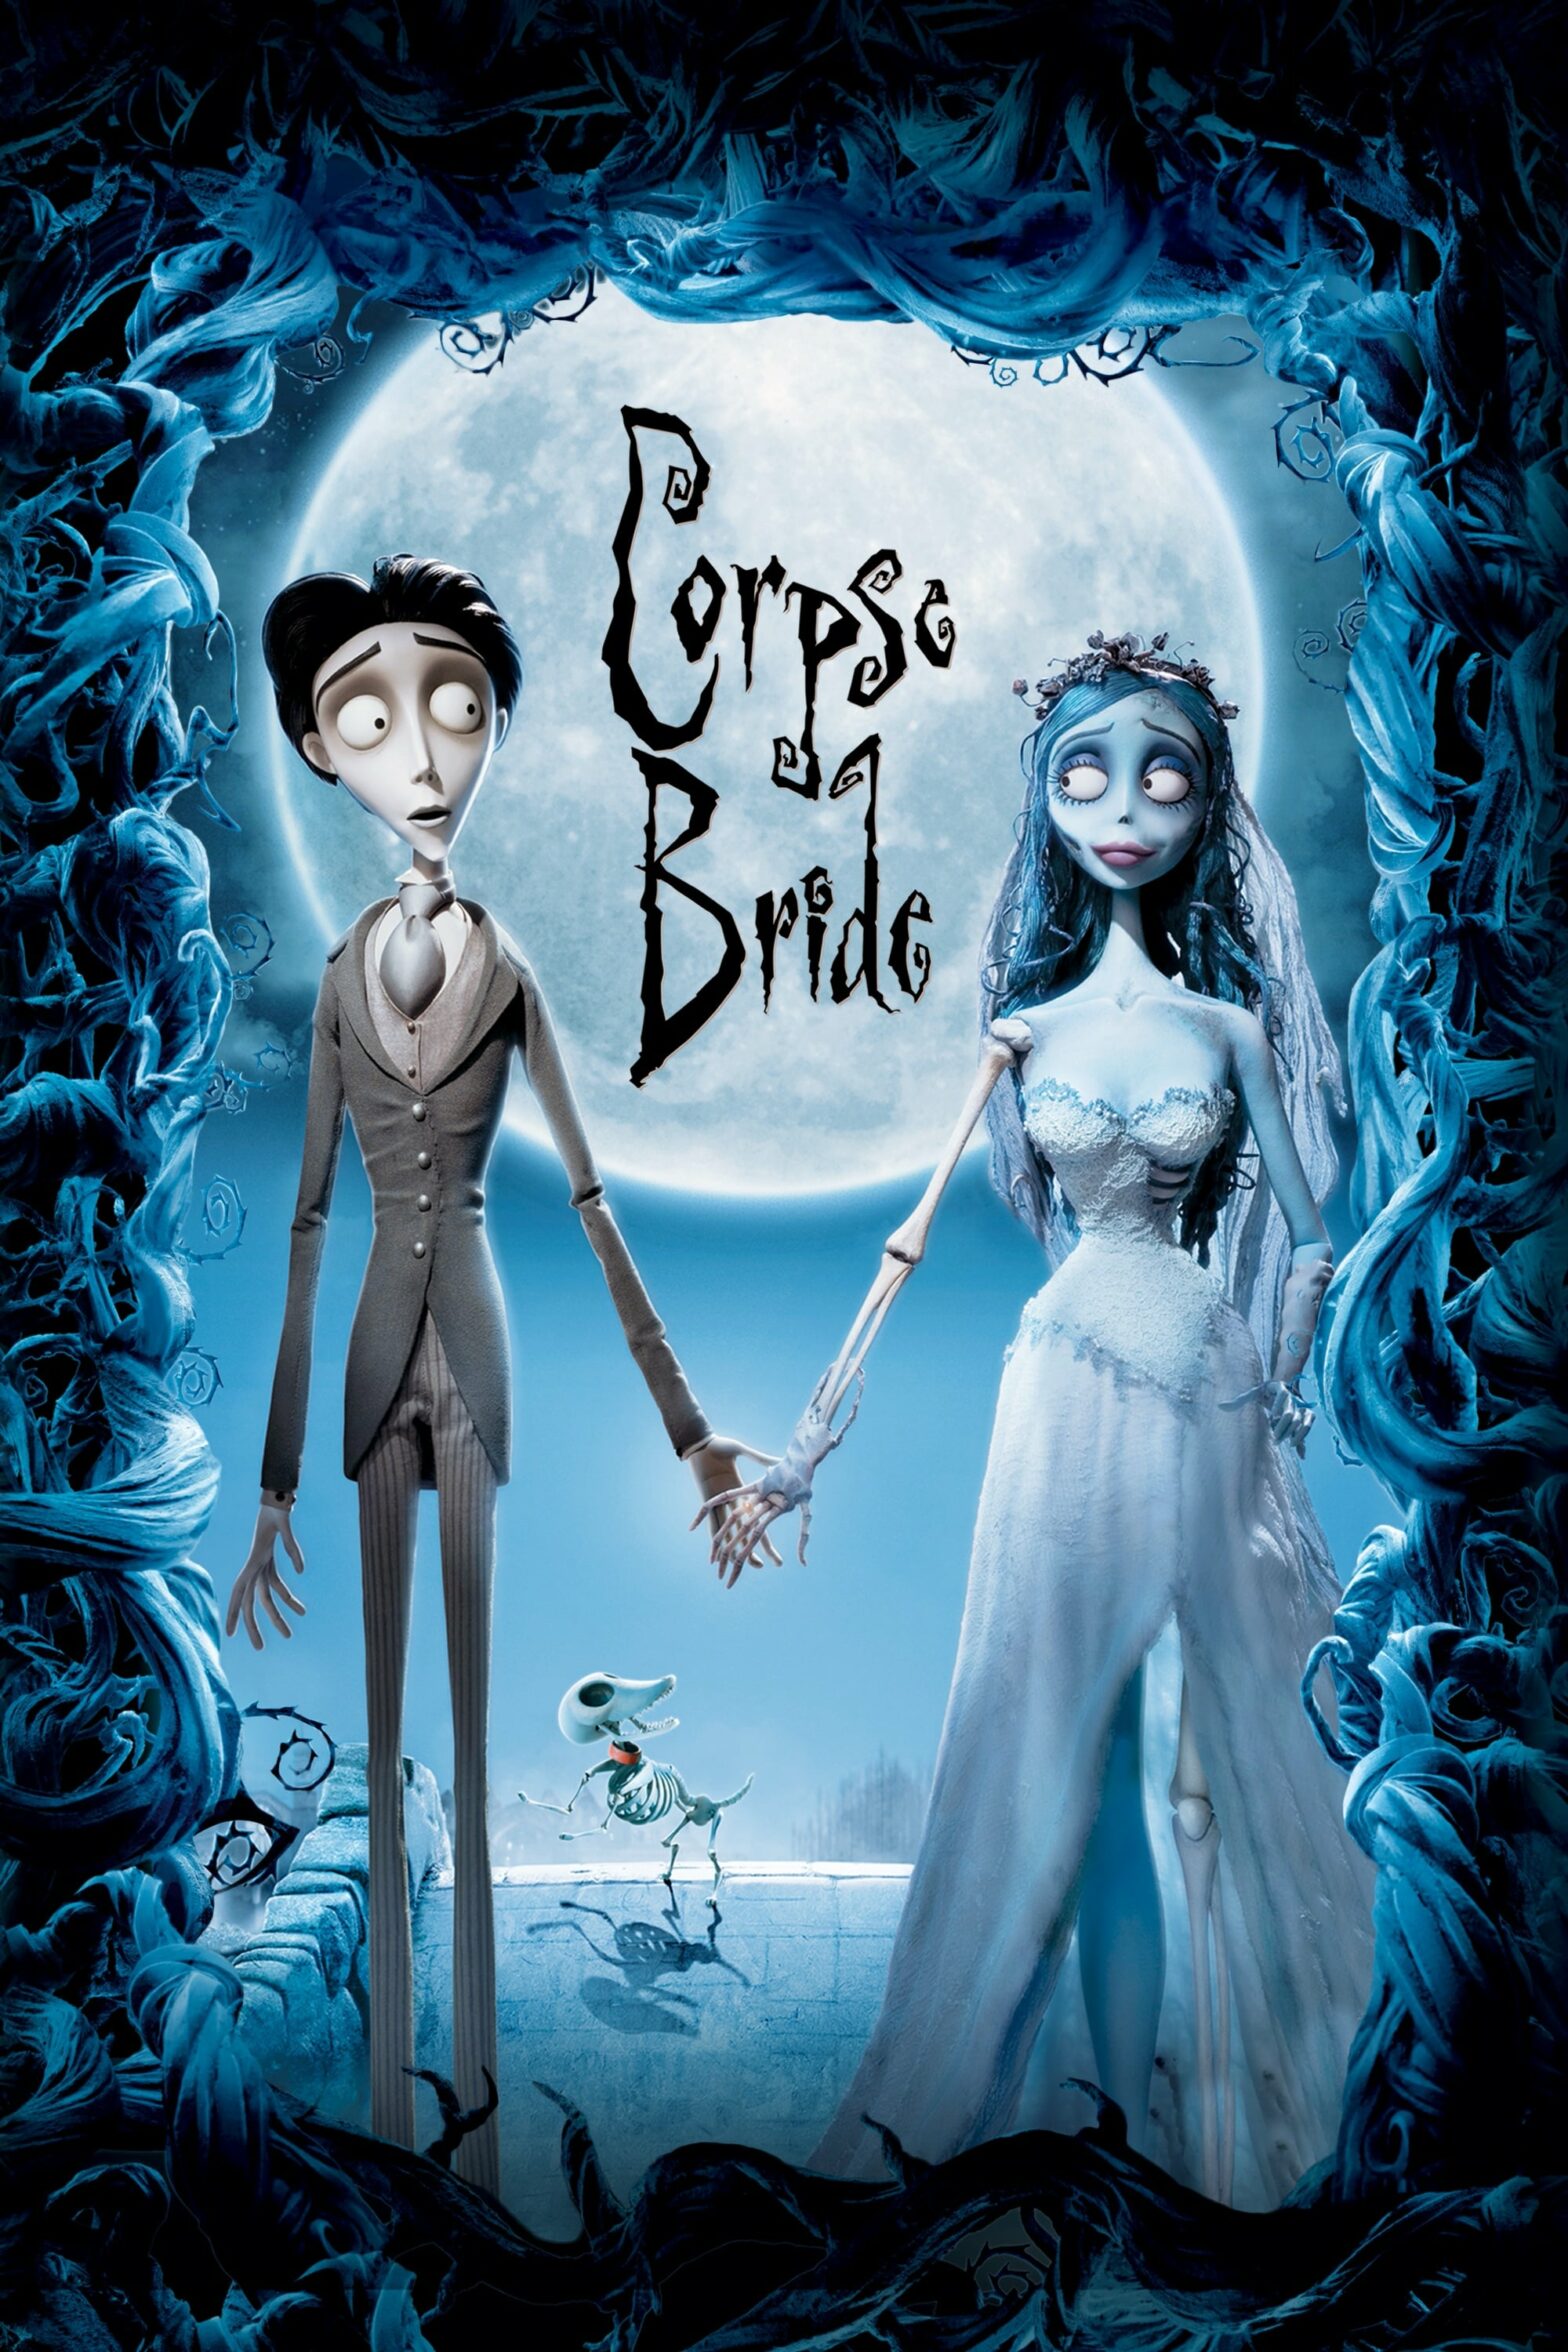 Poster for the movie "Corpse Bride"